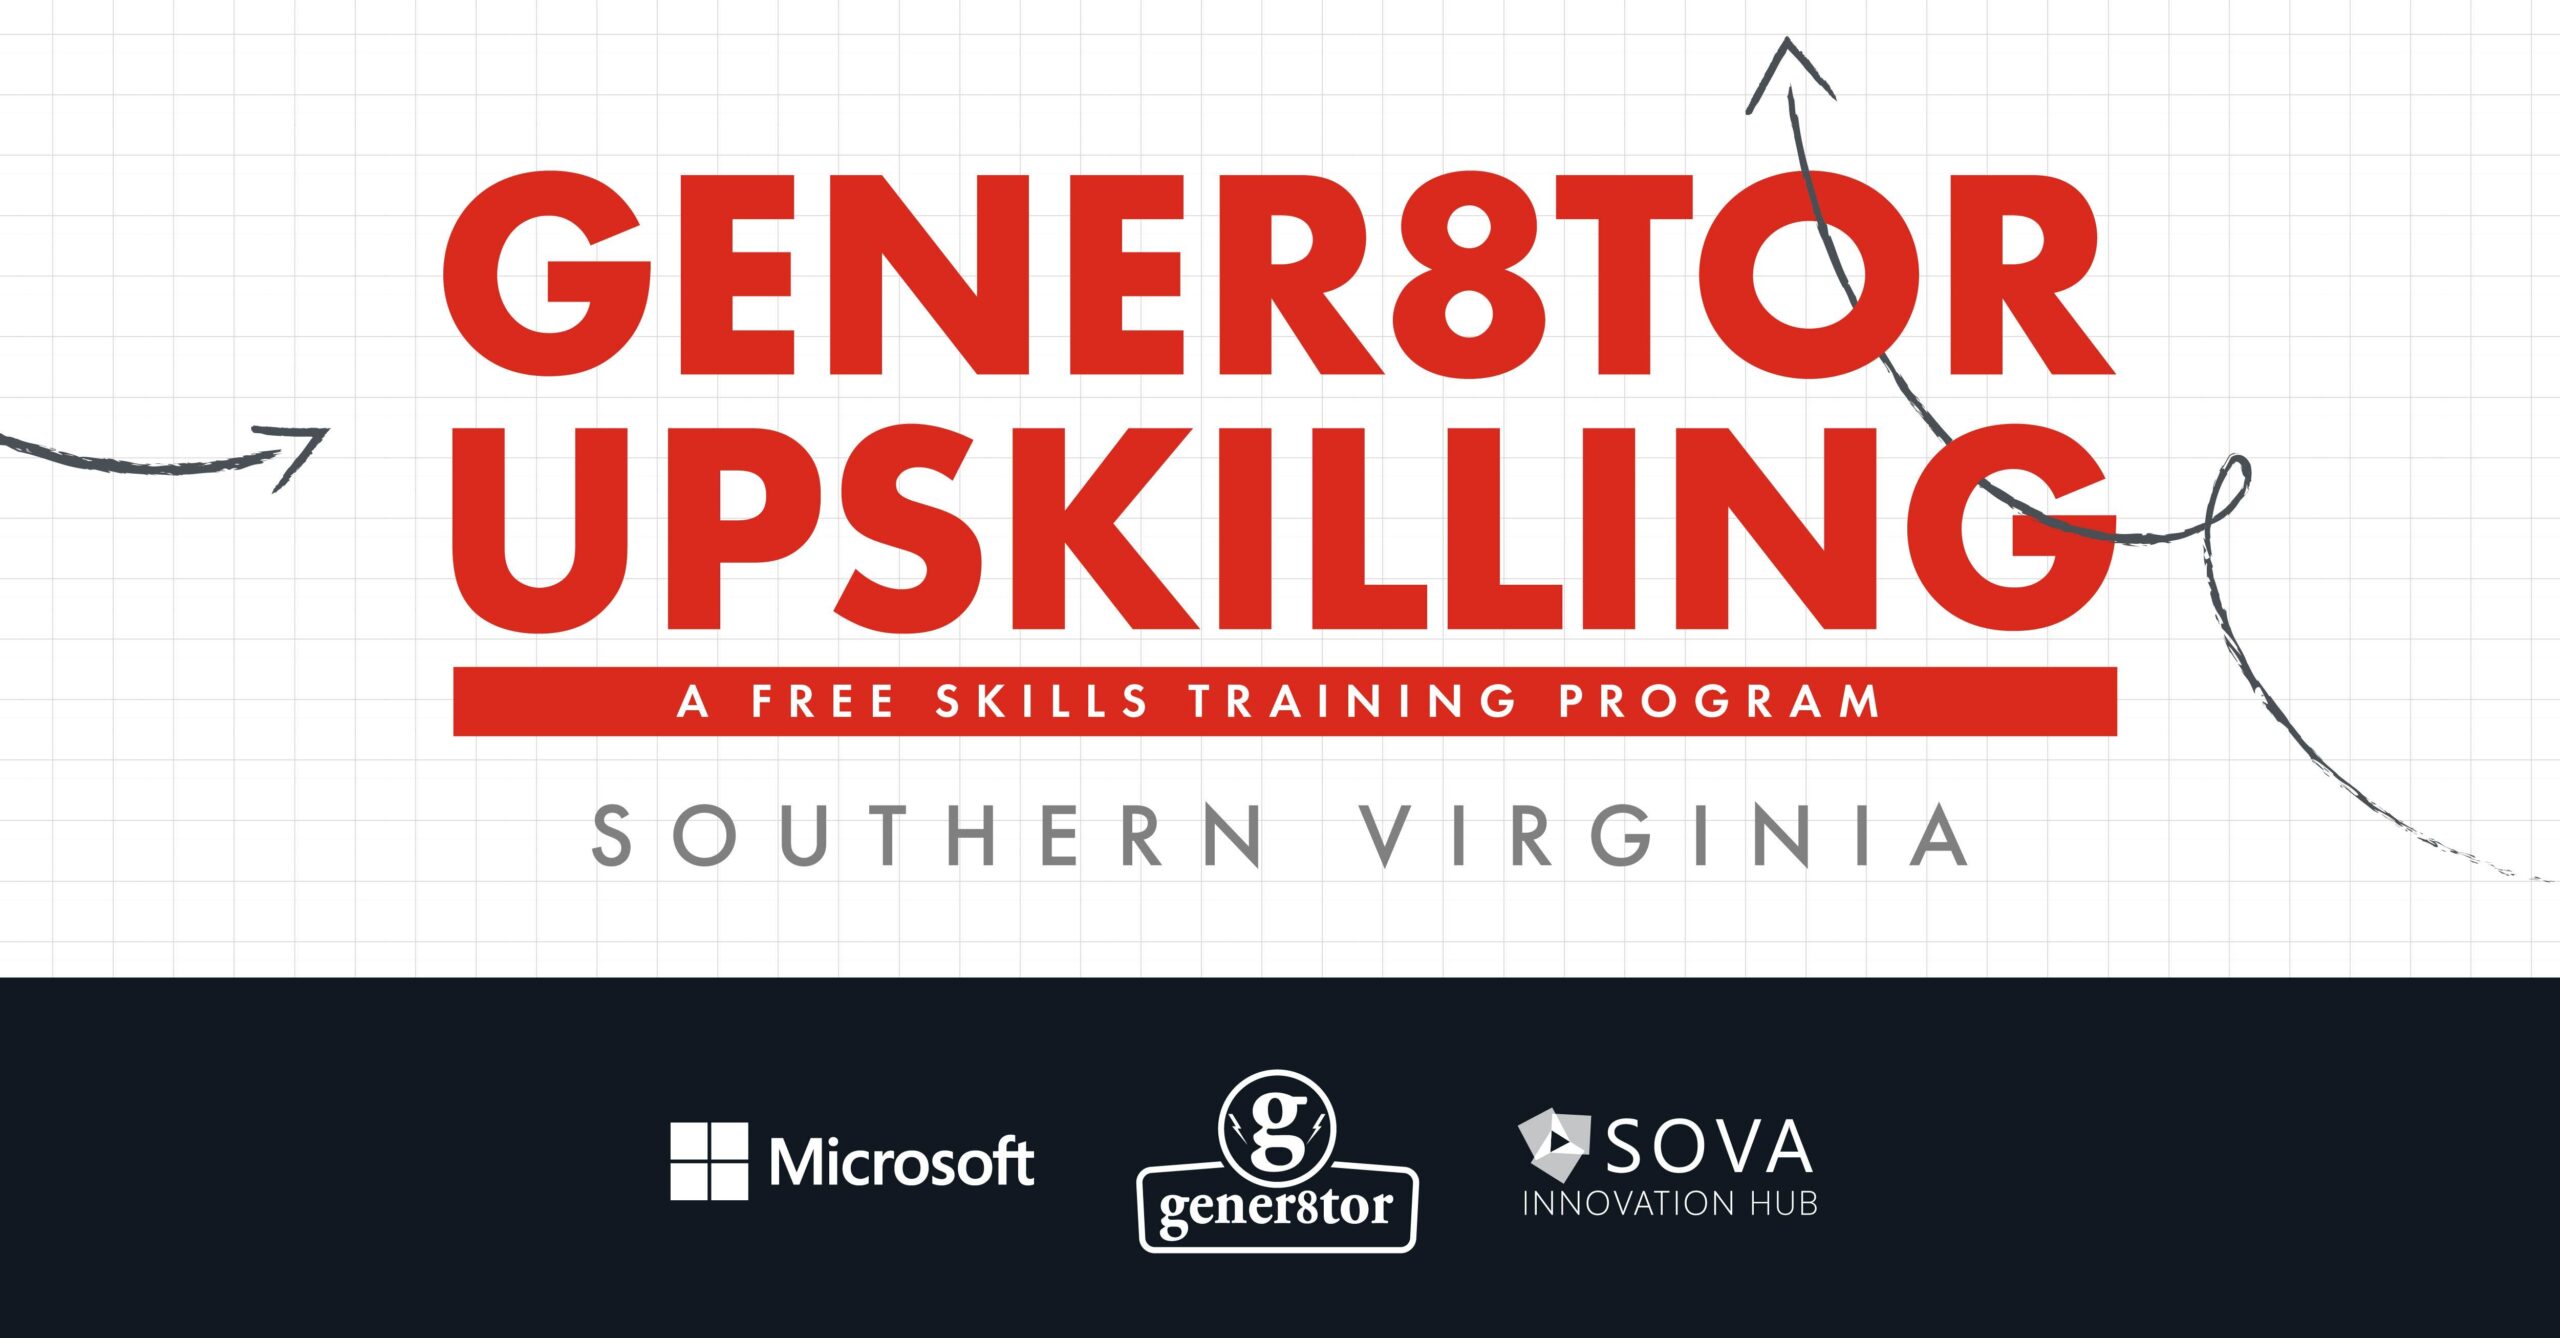 Free Job Skills Training Opportunity in Southern Virginia